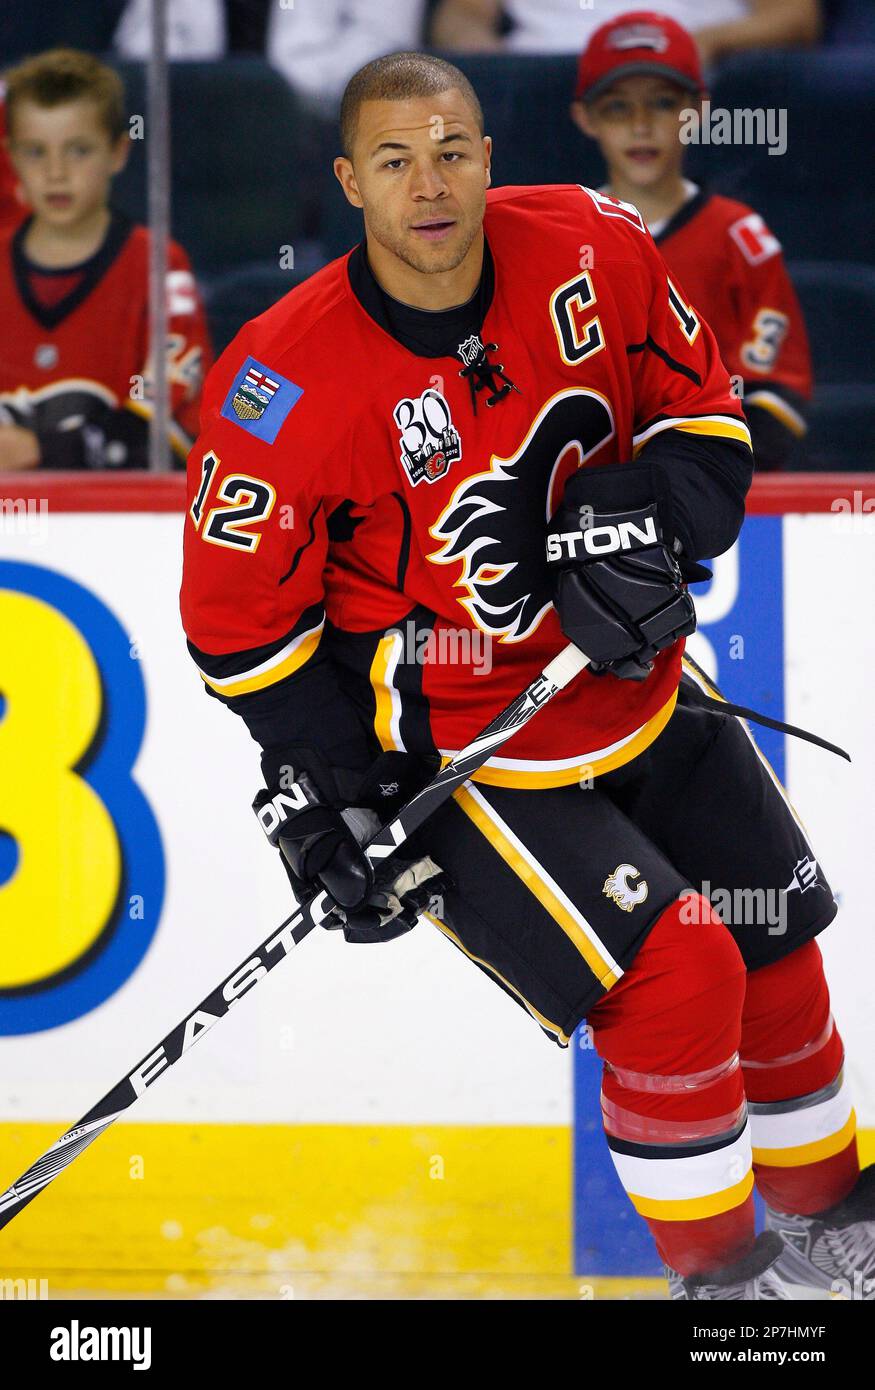 Jarome Iginla of the Calgary Flames skates onto the ice during